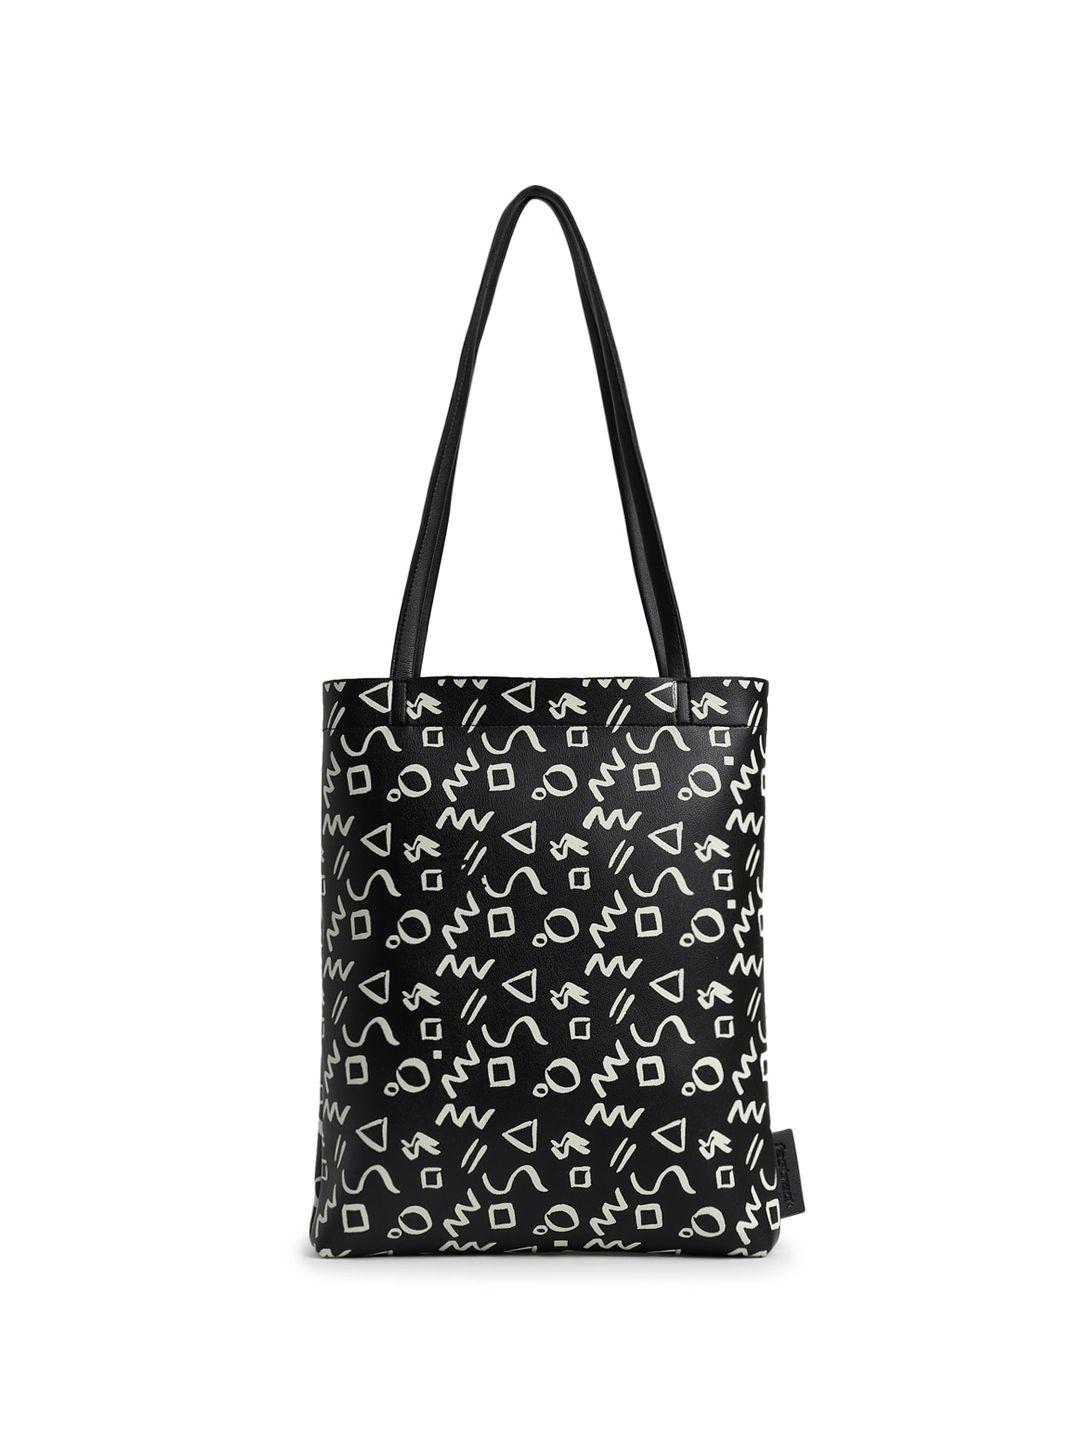 fastrack structured tote bag